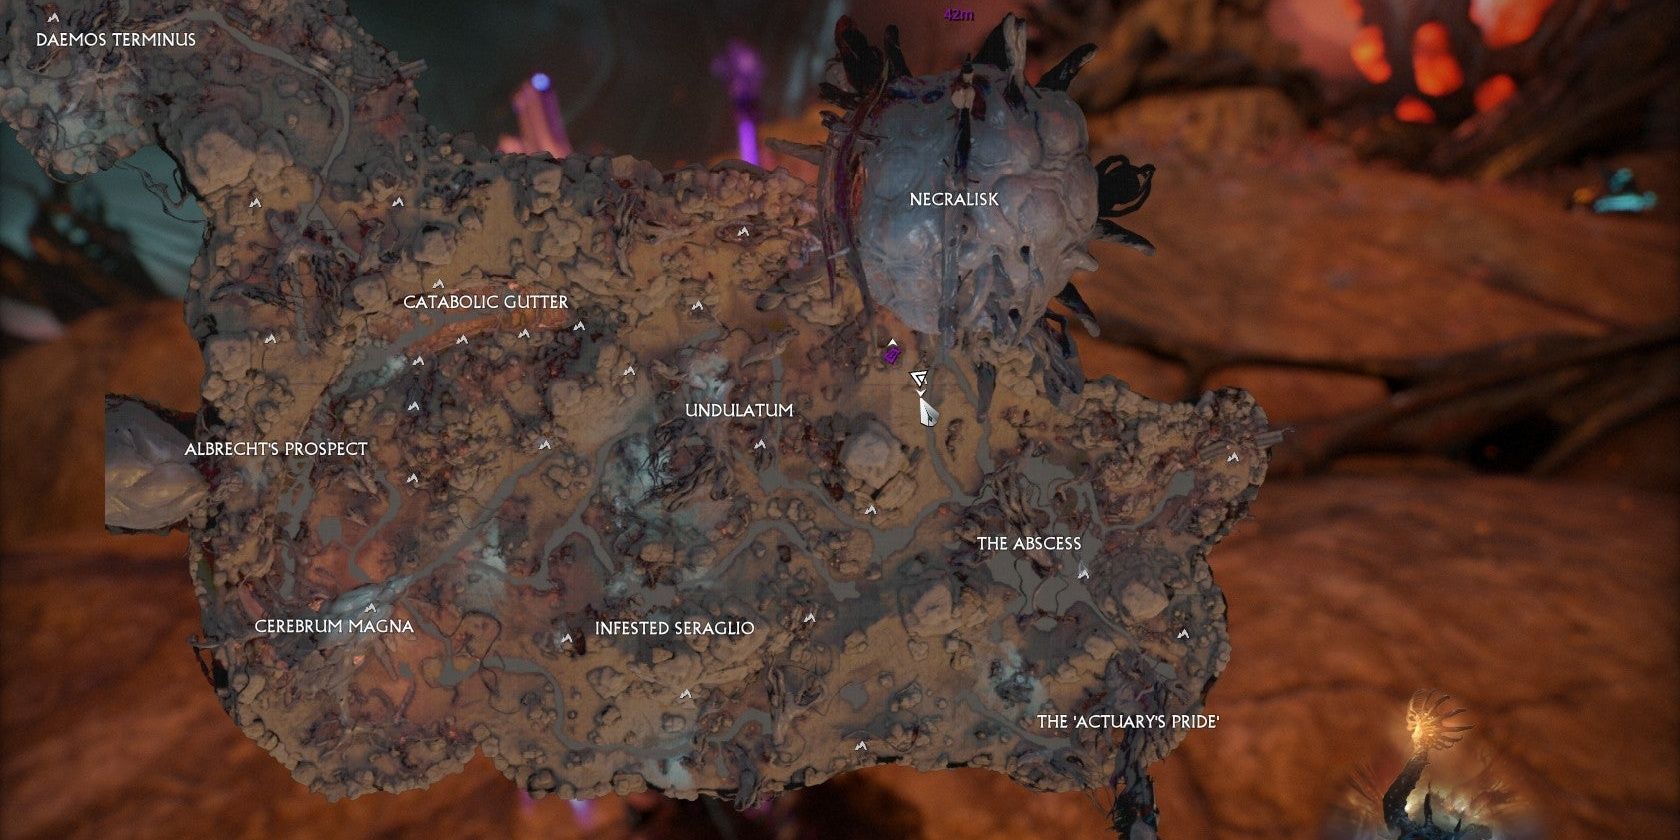 https://www.reddit.com/r/Warframe/comments/ik3kh2/you_can_find_tokens_in_random_caves_in_the/